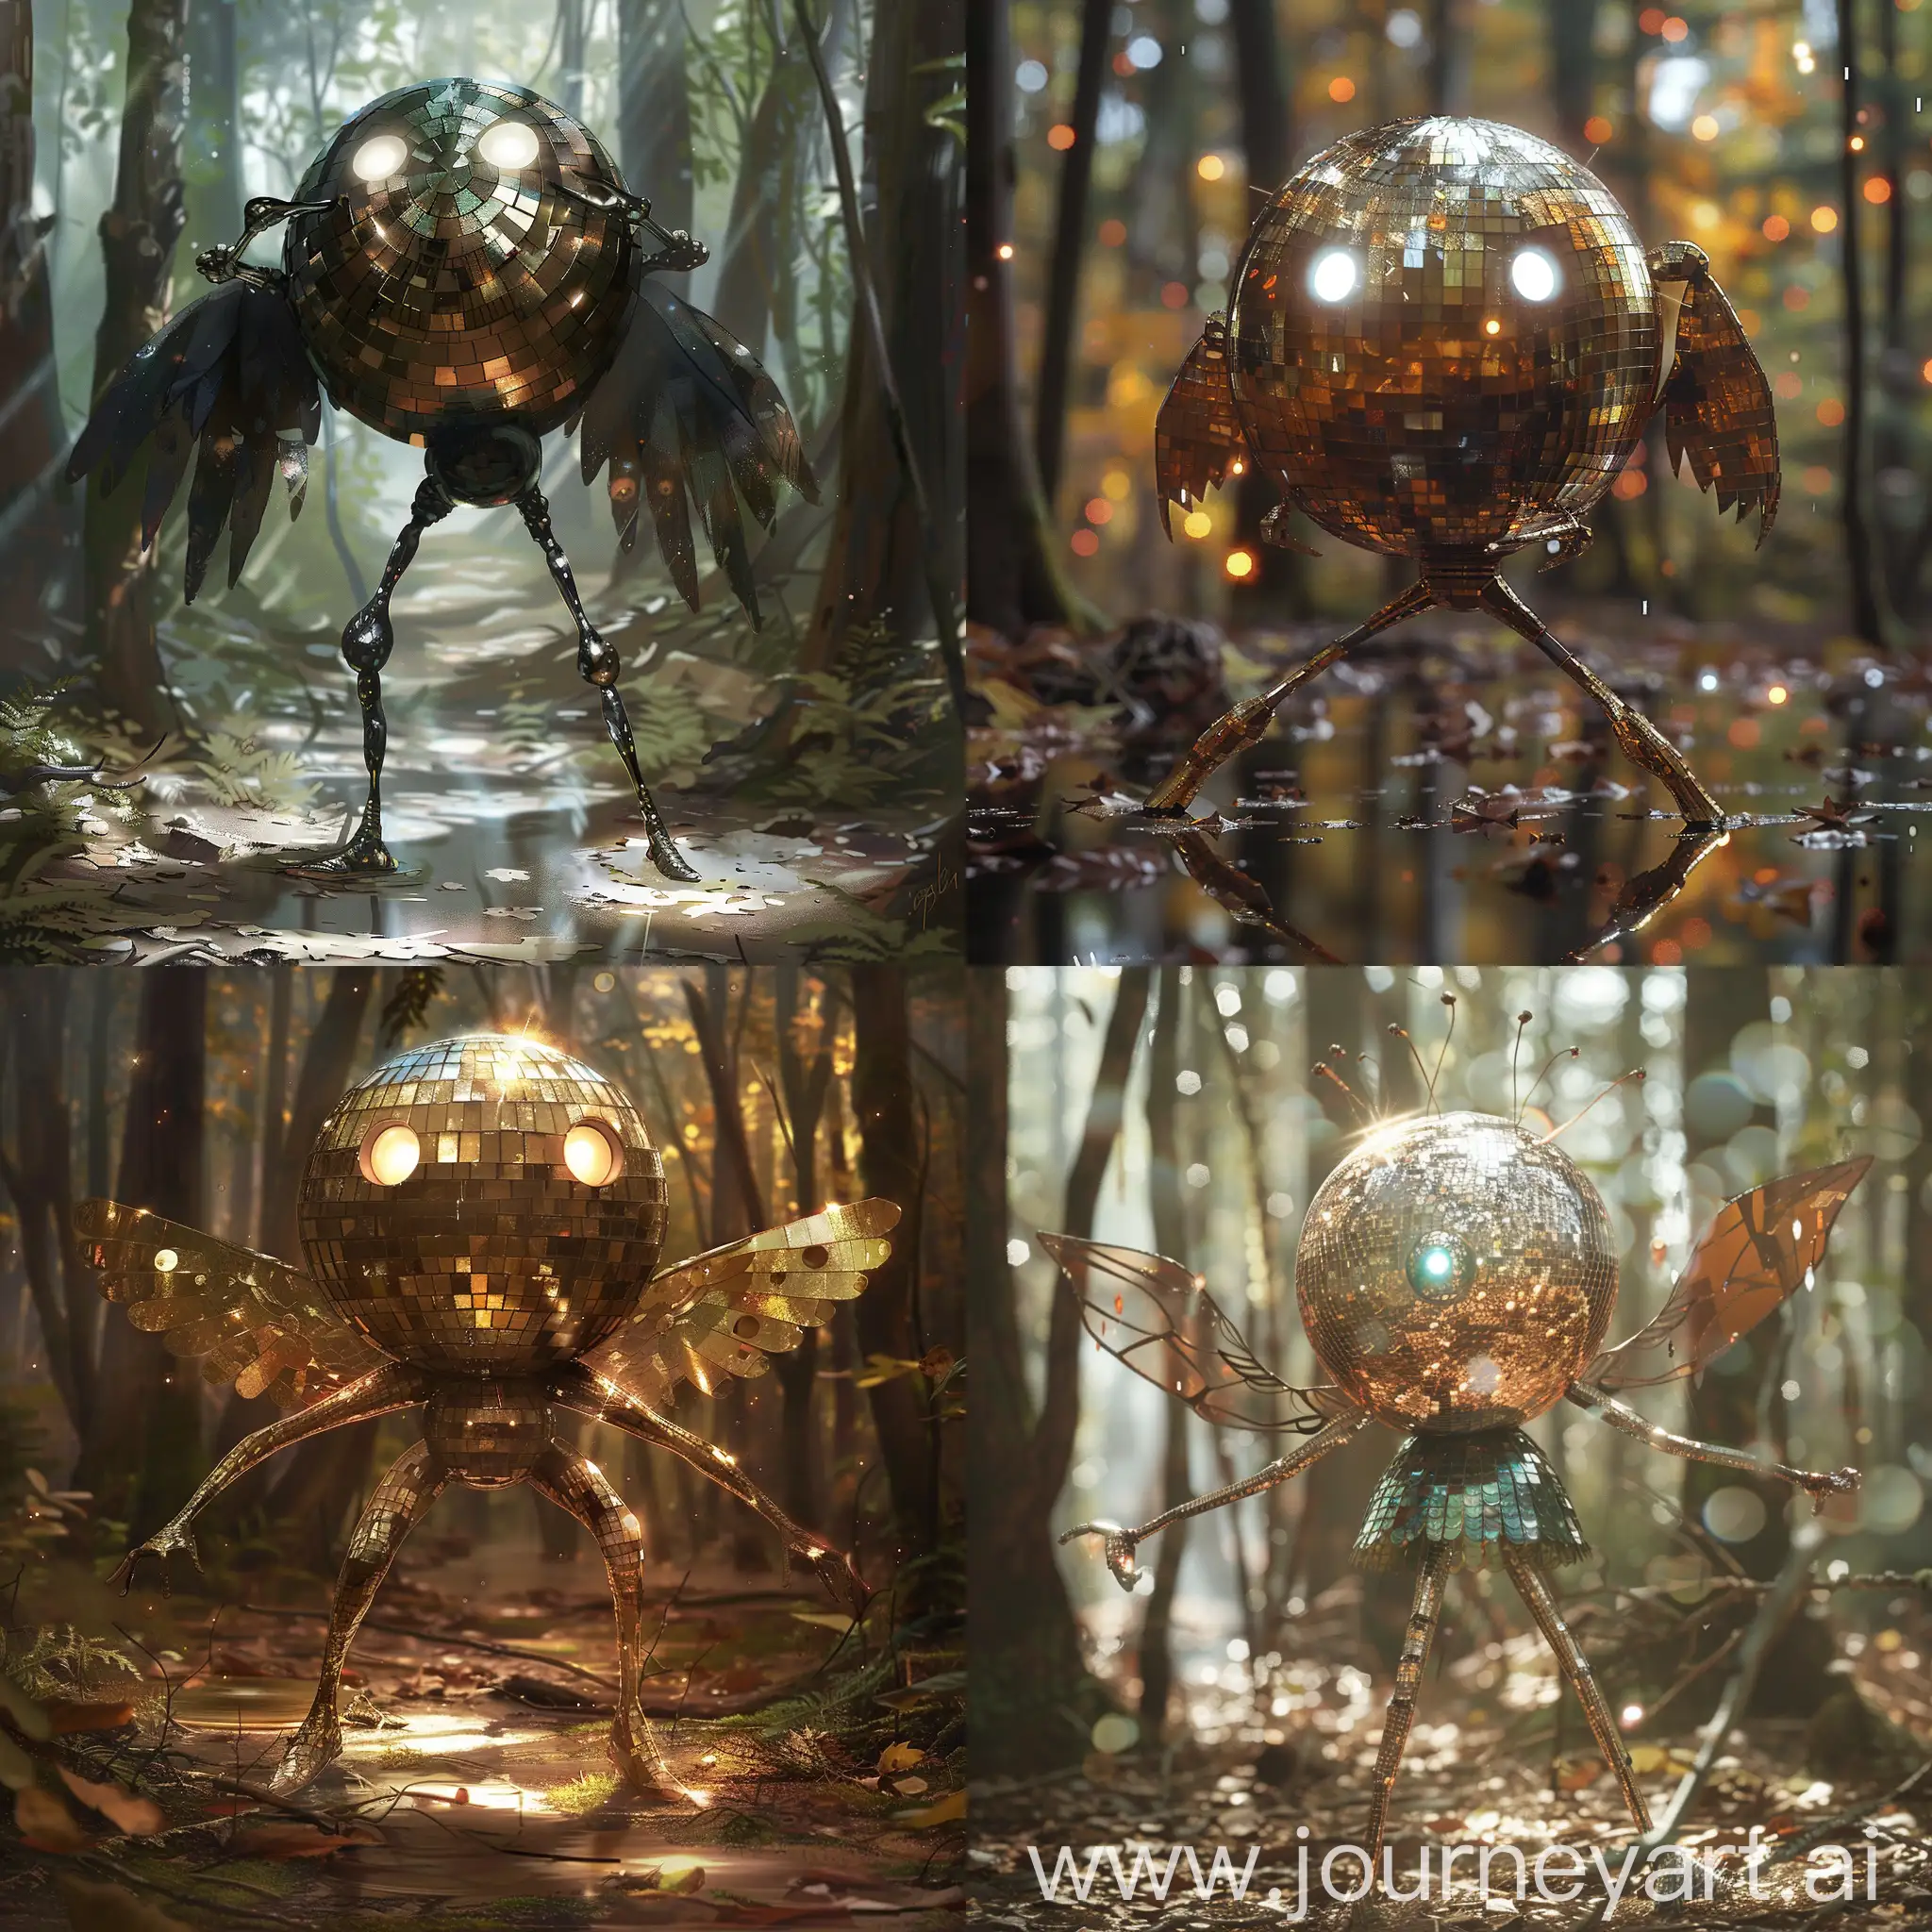 An image of a disco ball with legs, arms, and wings that looks like a person in miniature. This disco-ball-head mascot has luminescent eyes. Art style: fairy tale in the woods. The surroundings must have reflections of light and mirrors.